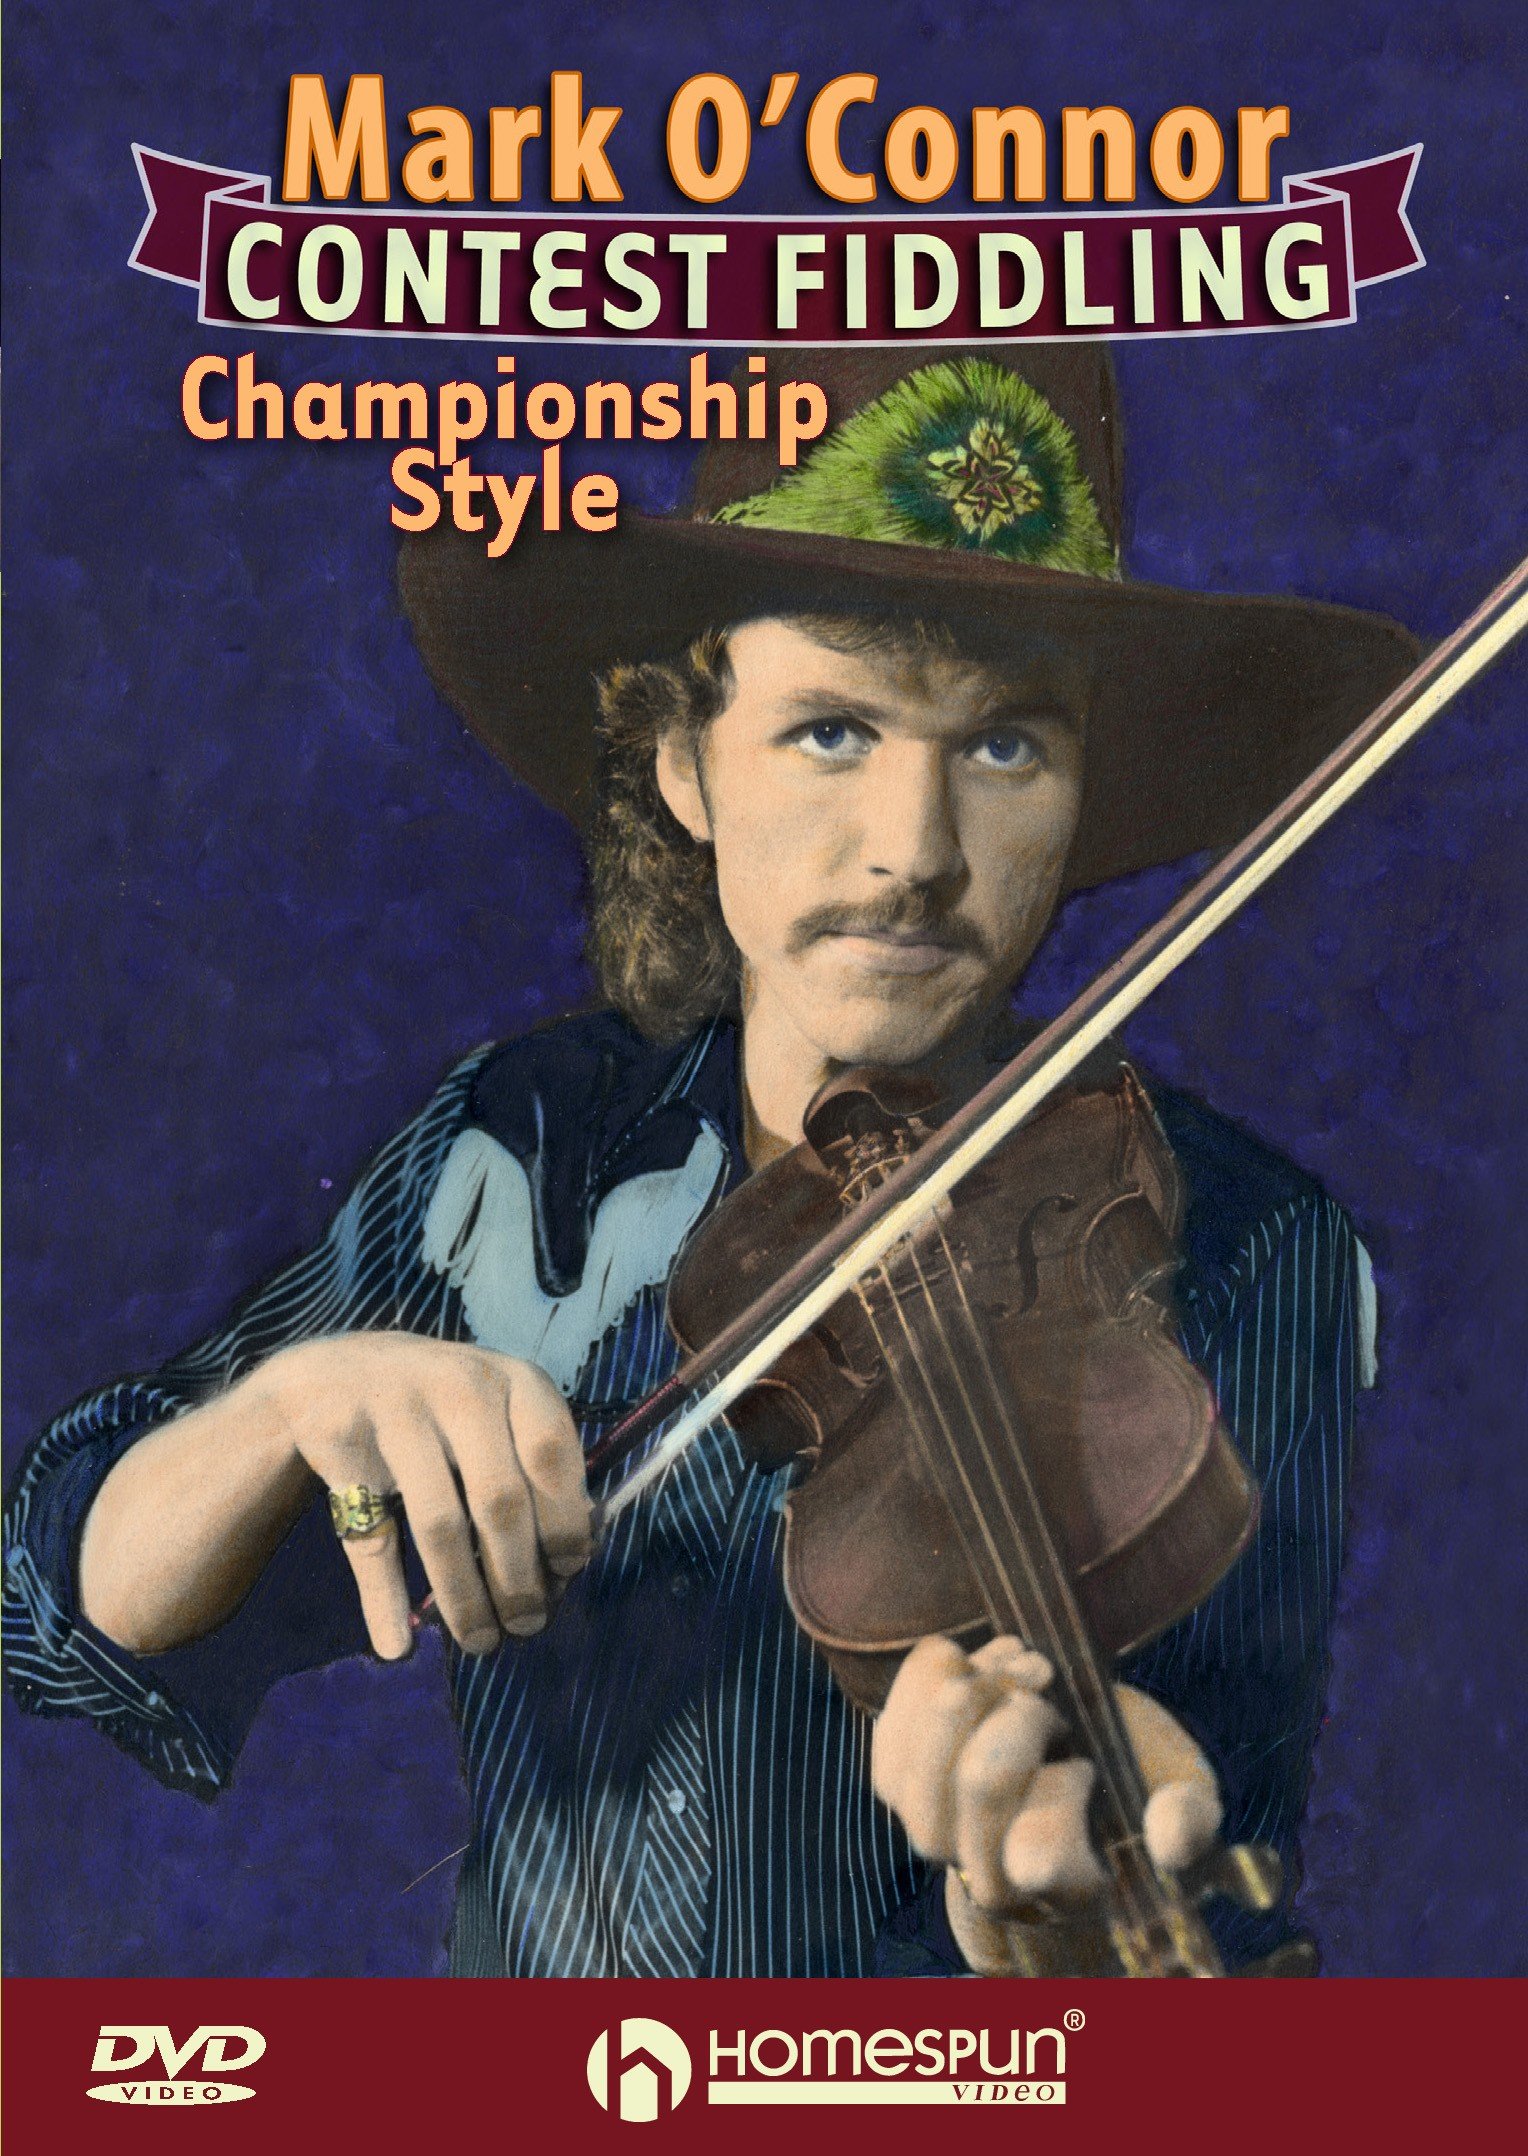 Mark O’Connor: Contest Fiddling Championship Style